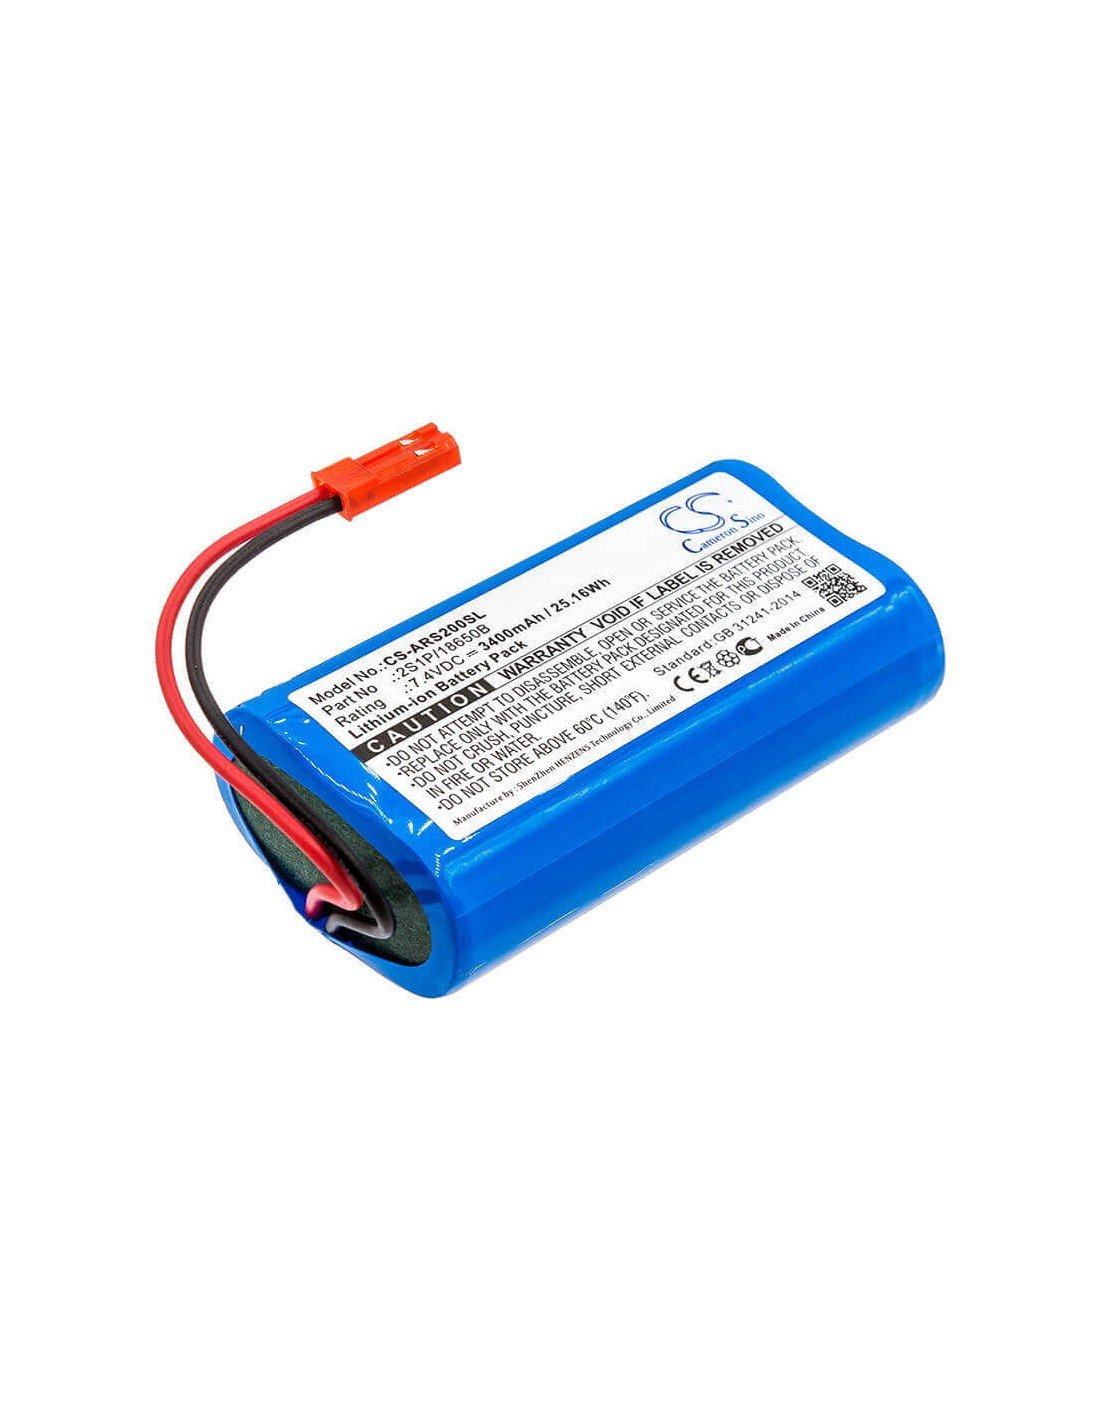 Battery for Arizer, Solo, Solo 2 7.4V, 3400mAh - 25.16Wh